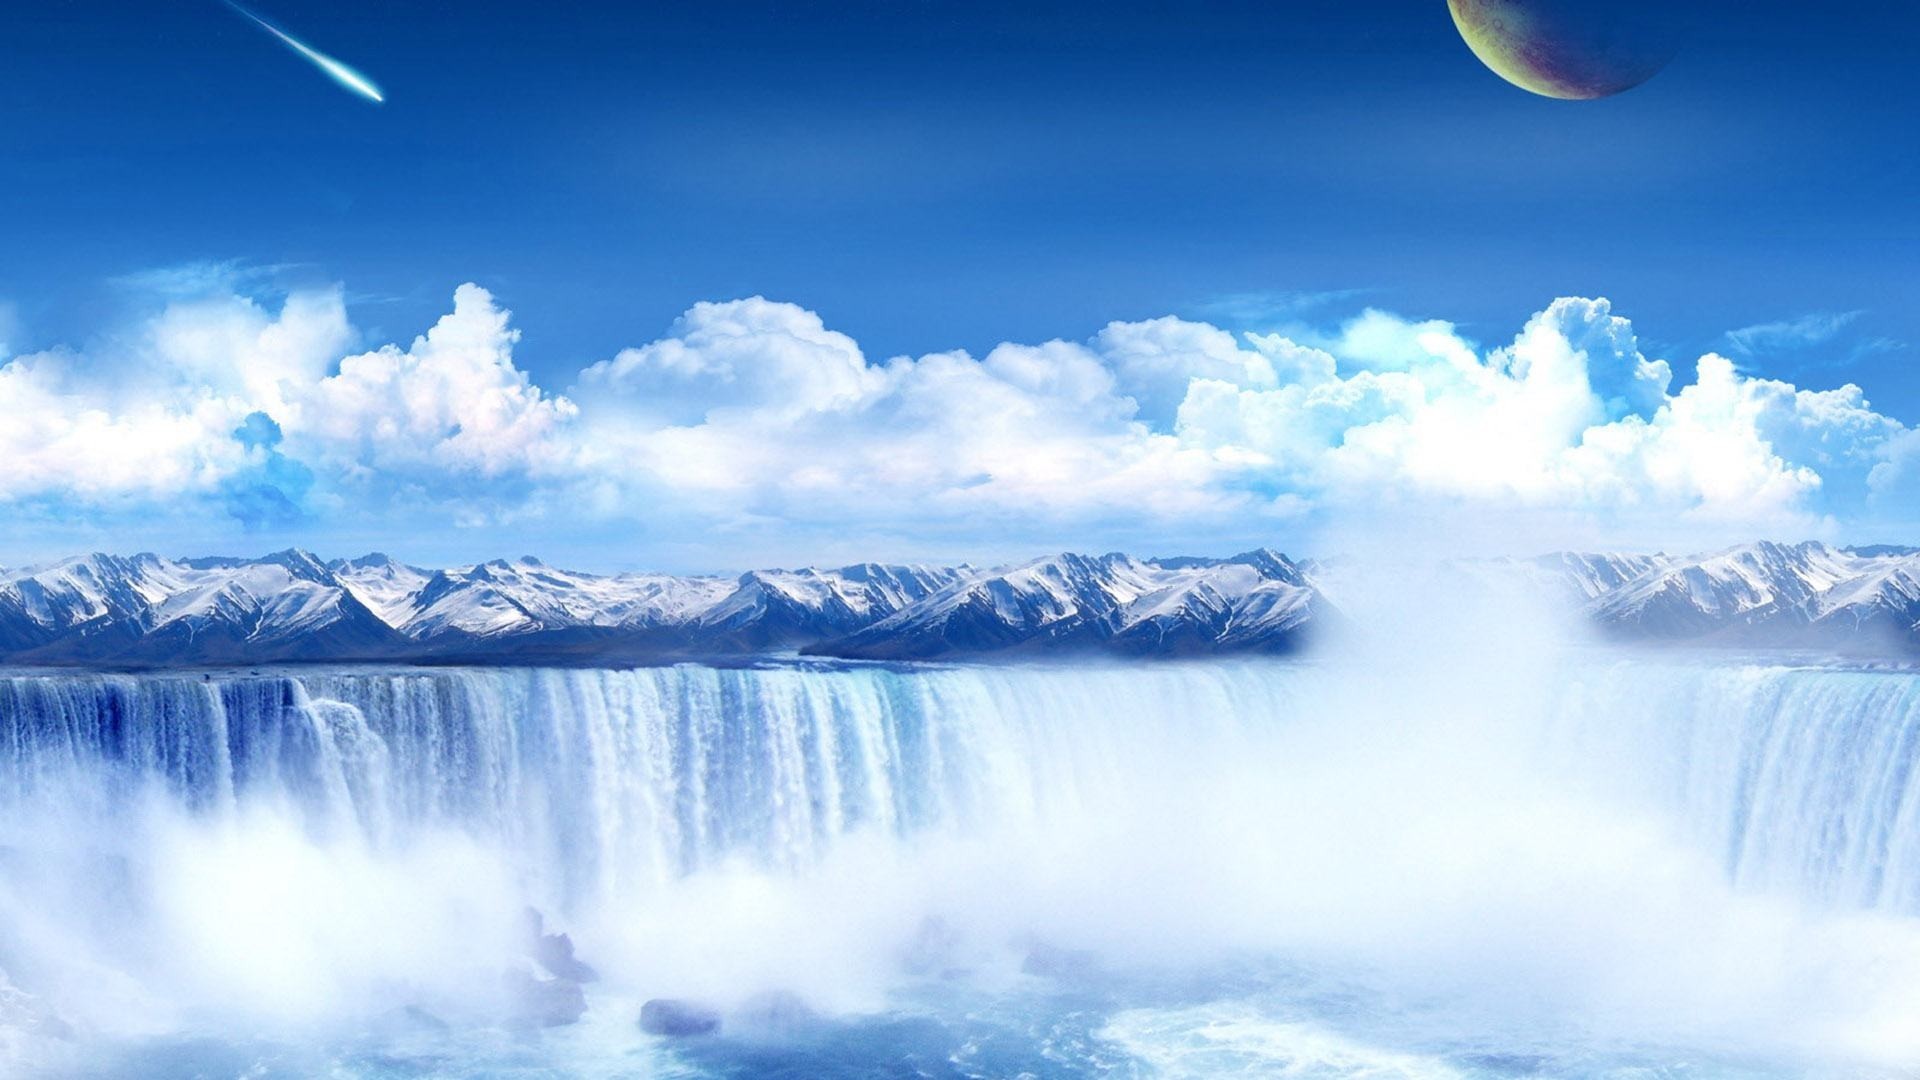 1920x1080  Wallpapers Backgrounds - wallpapers part fantasy space waterfall desktop  background screensaver